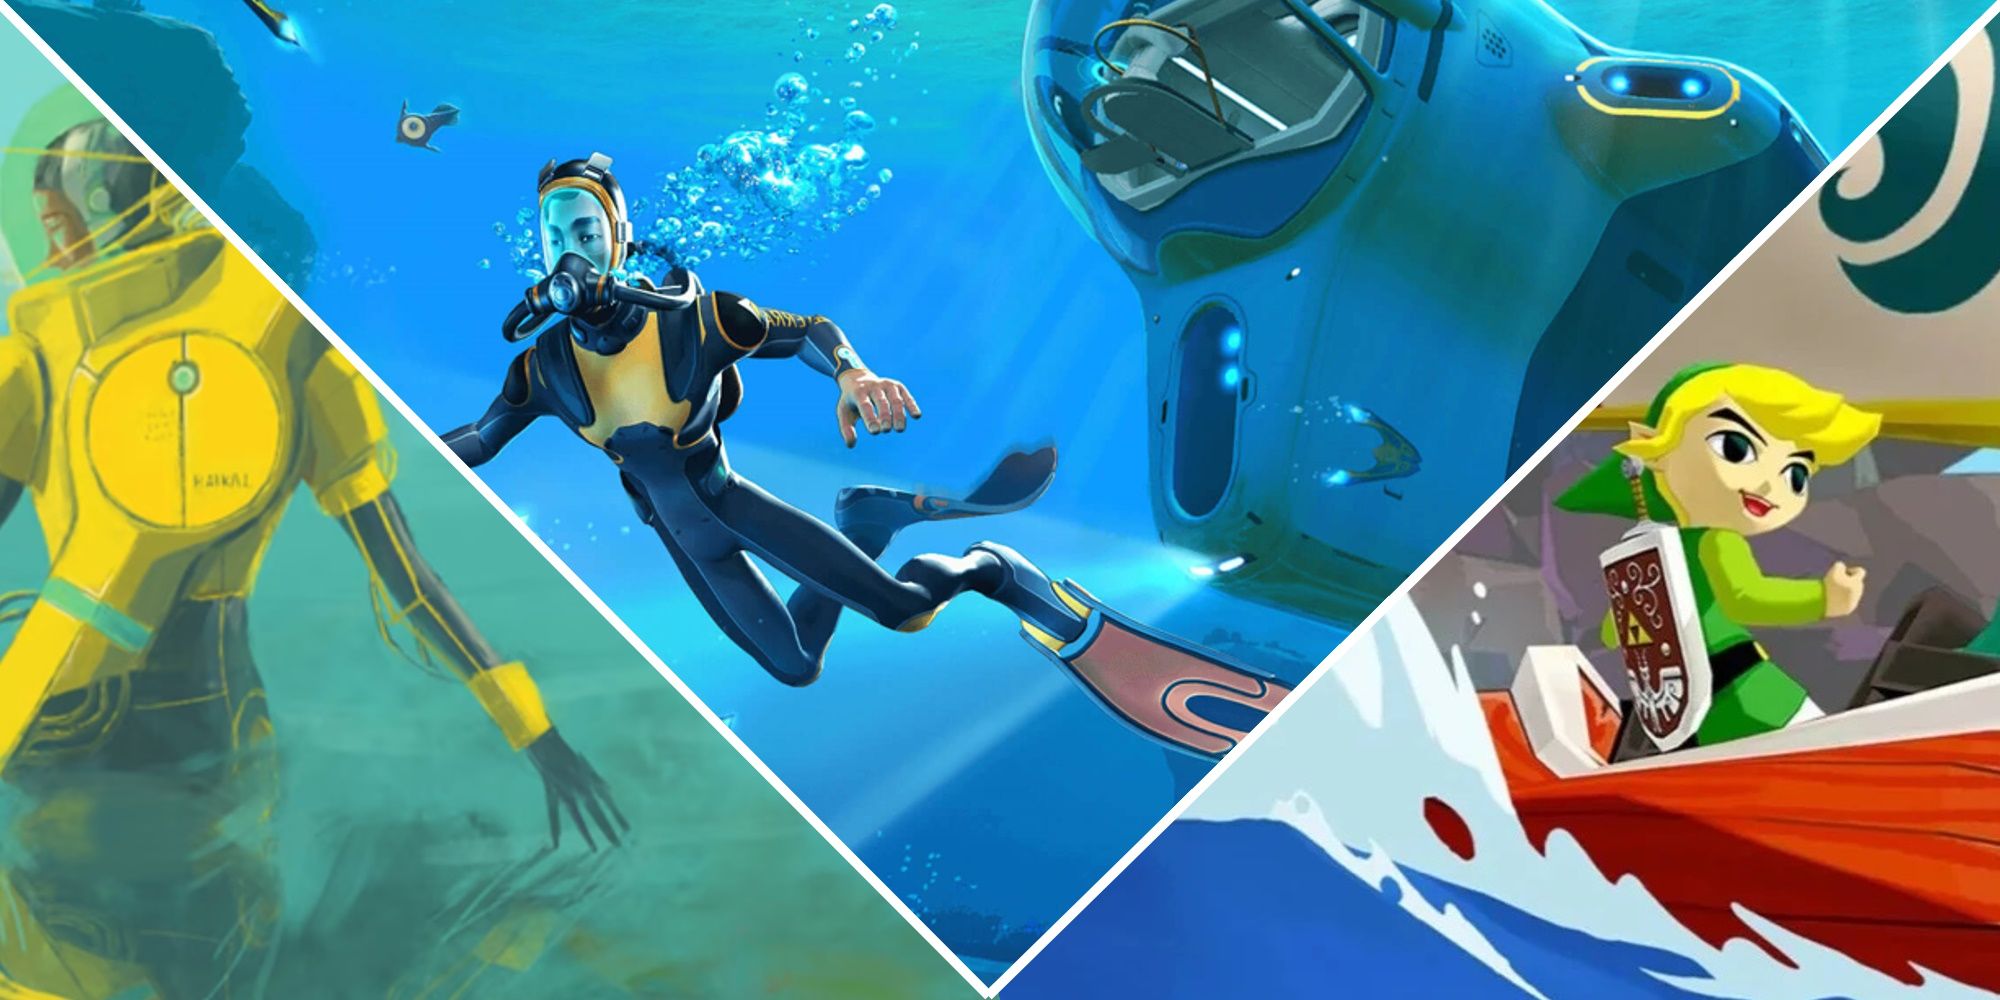 In Other Waters, Subnautica, and Wind Waker